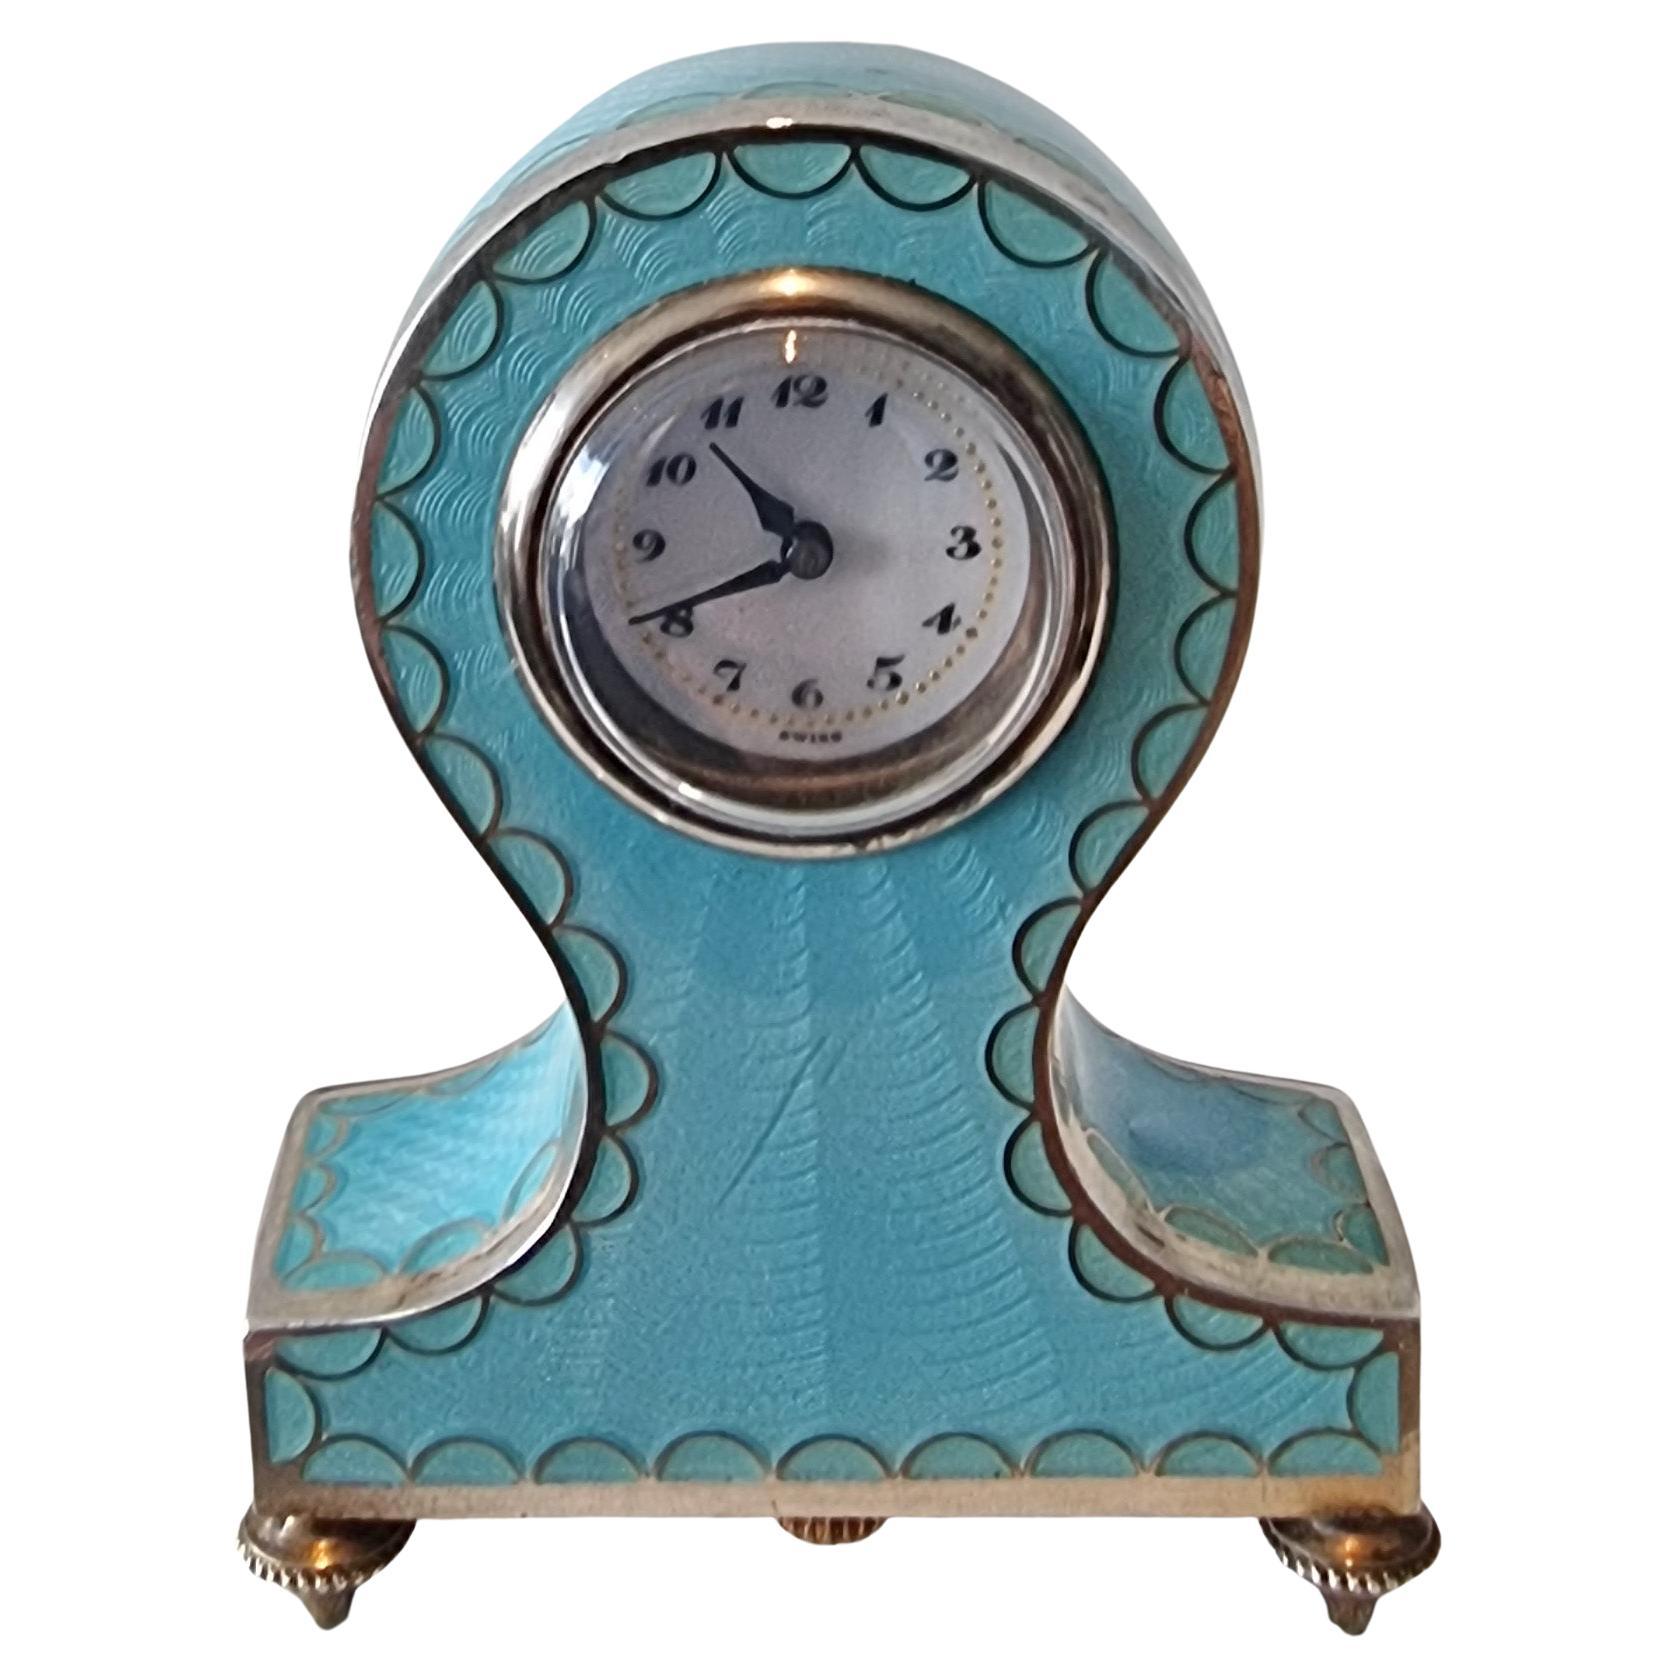 Silver and Turquoise Guilloche Enamel sub miniature boudoir Clock For Sale